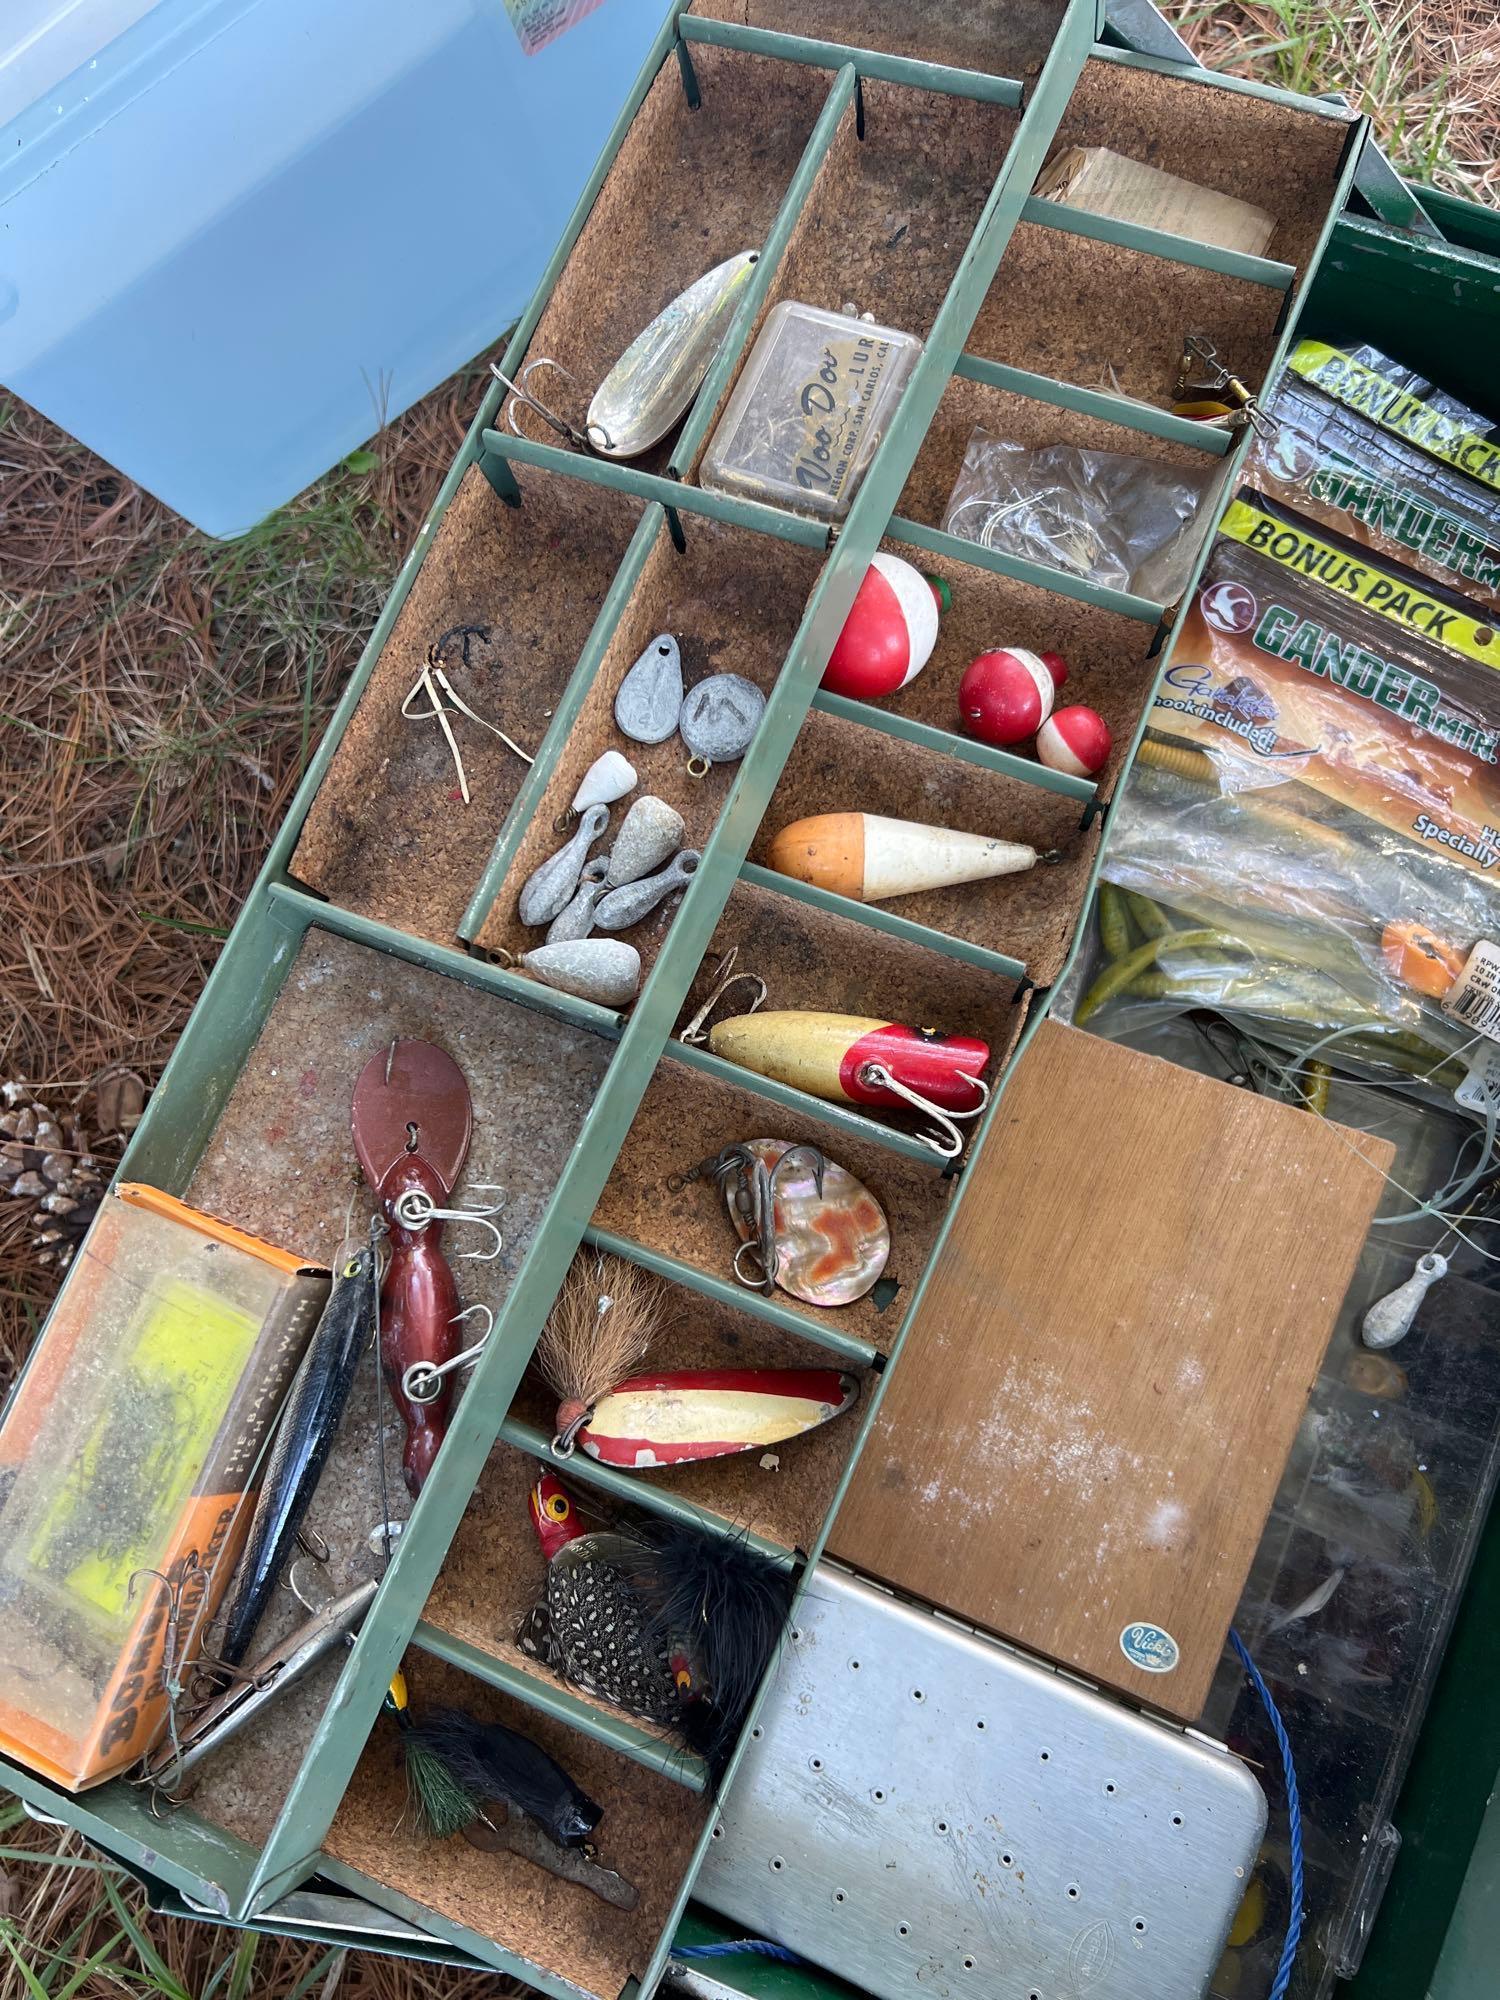 4 tackle boxes and lures